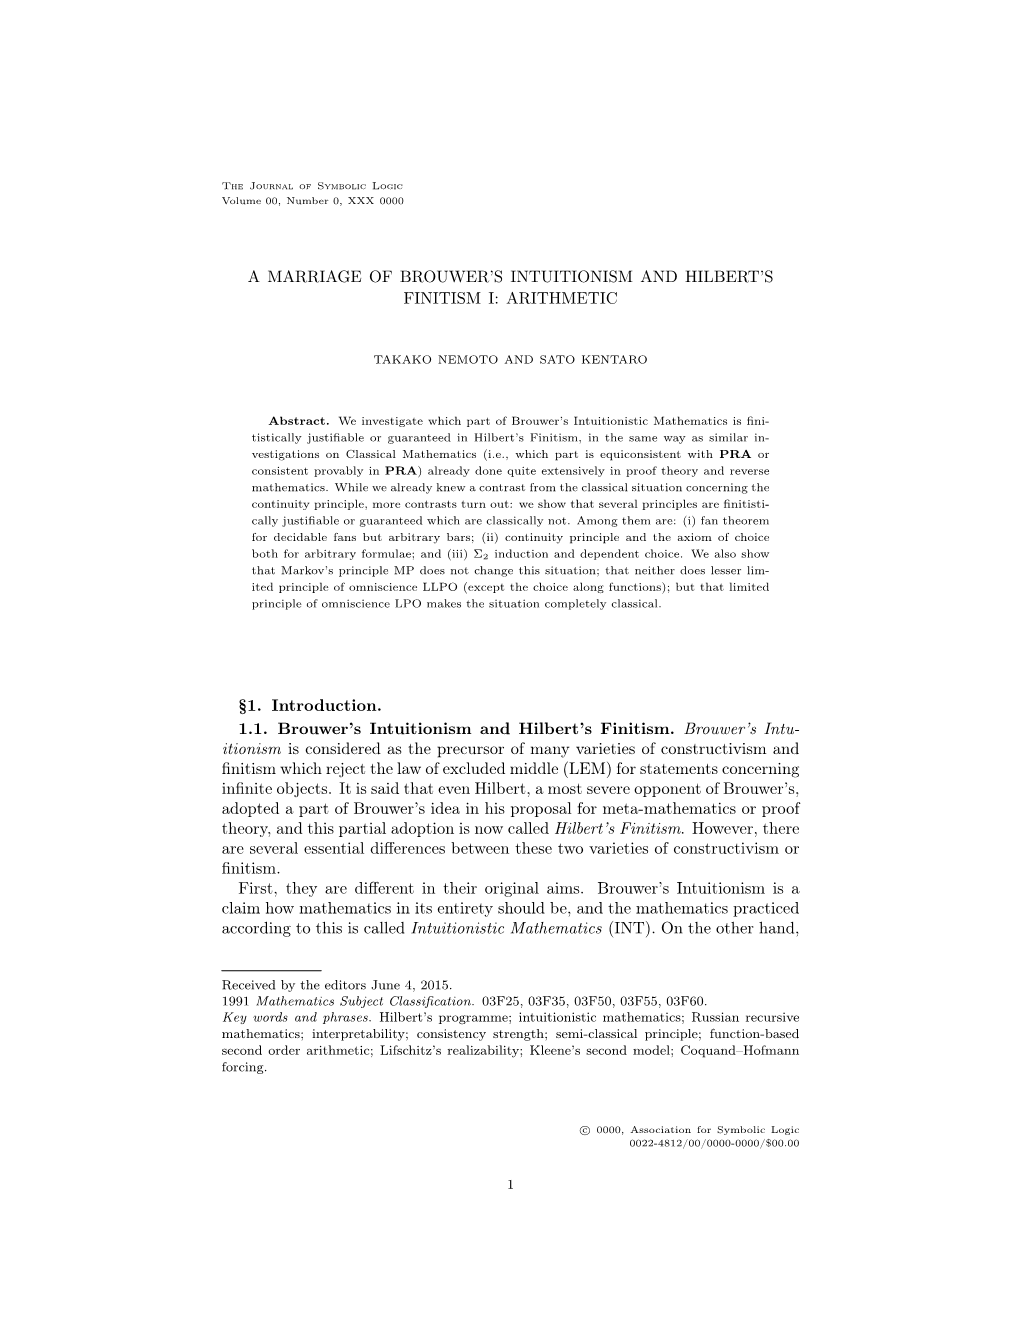 A Marriage of Brouwer's Intuitionism and Hilbert's Finitism I: Arithmetic